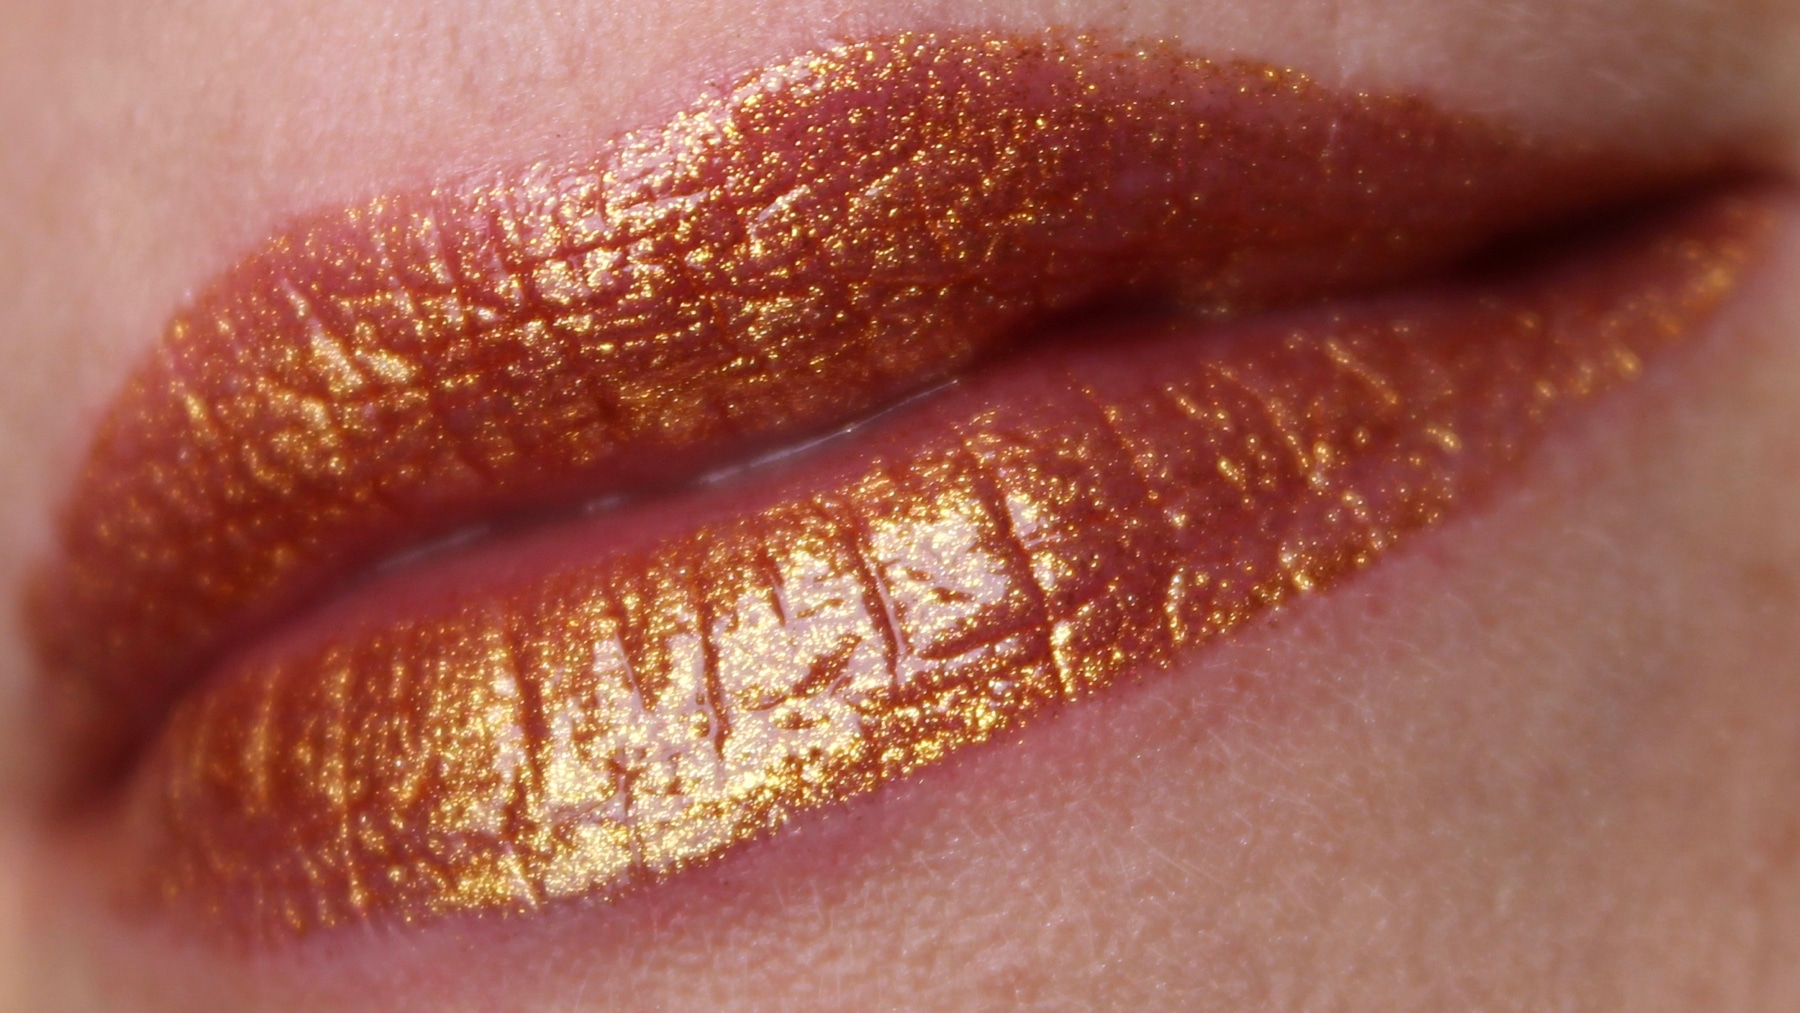 The Melted Gold Liquified Gold Lip Gloss is infused with real gold and offe...